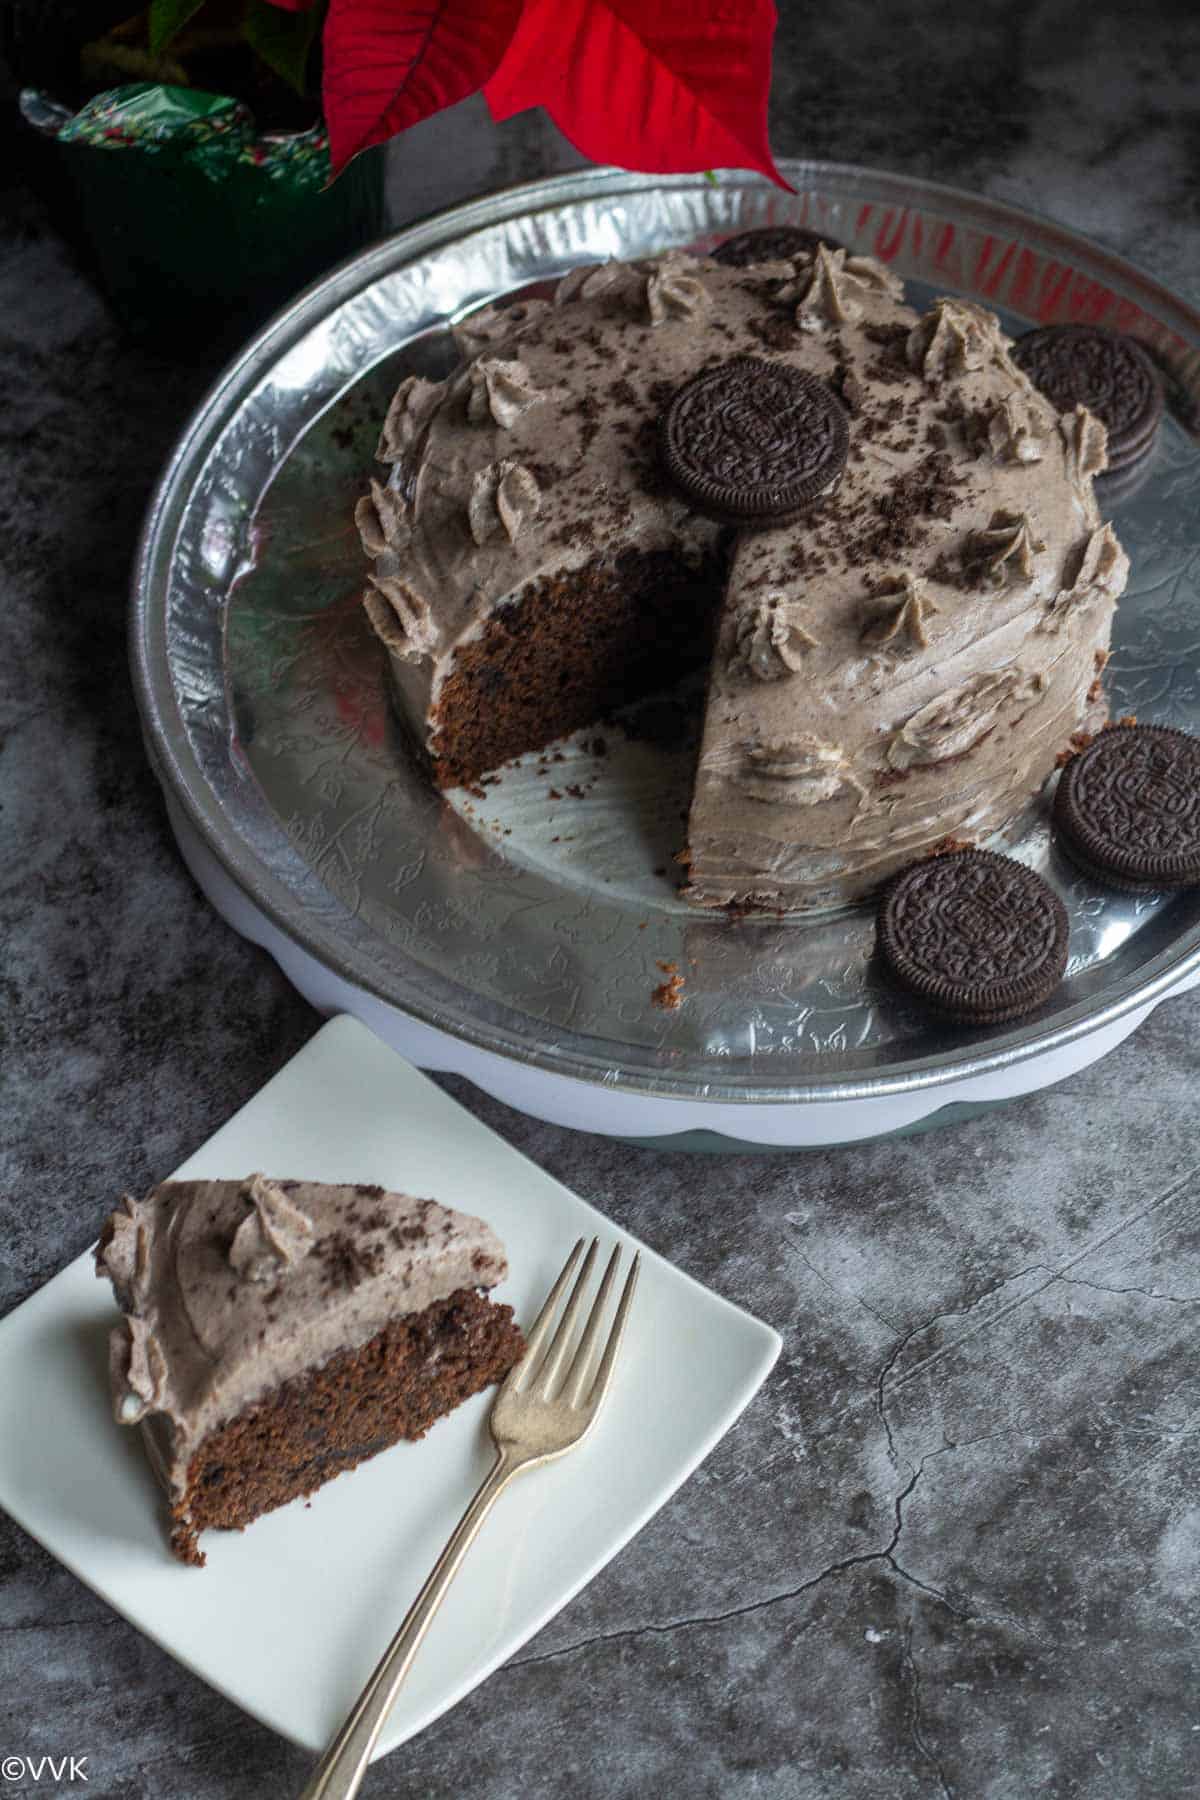 oreo cake served in silver tray and with one slice on the plate